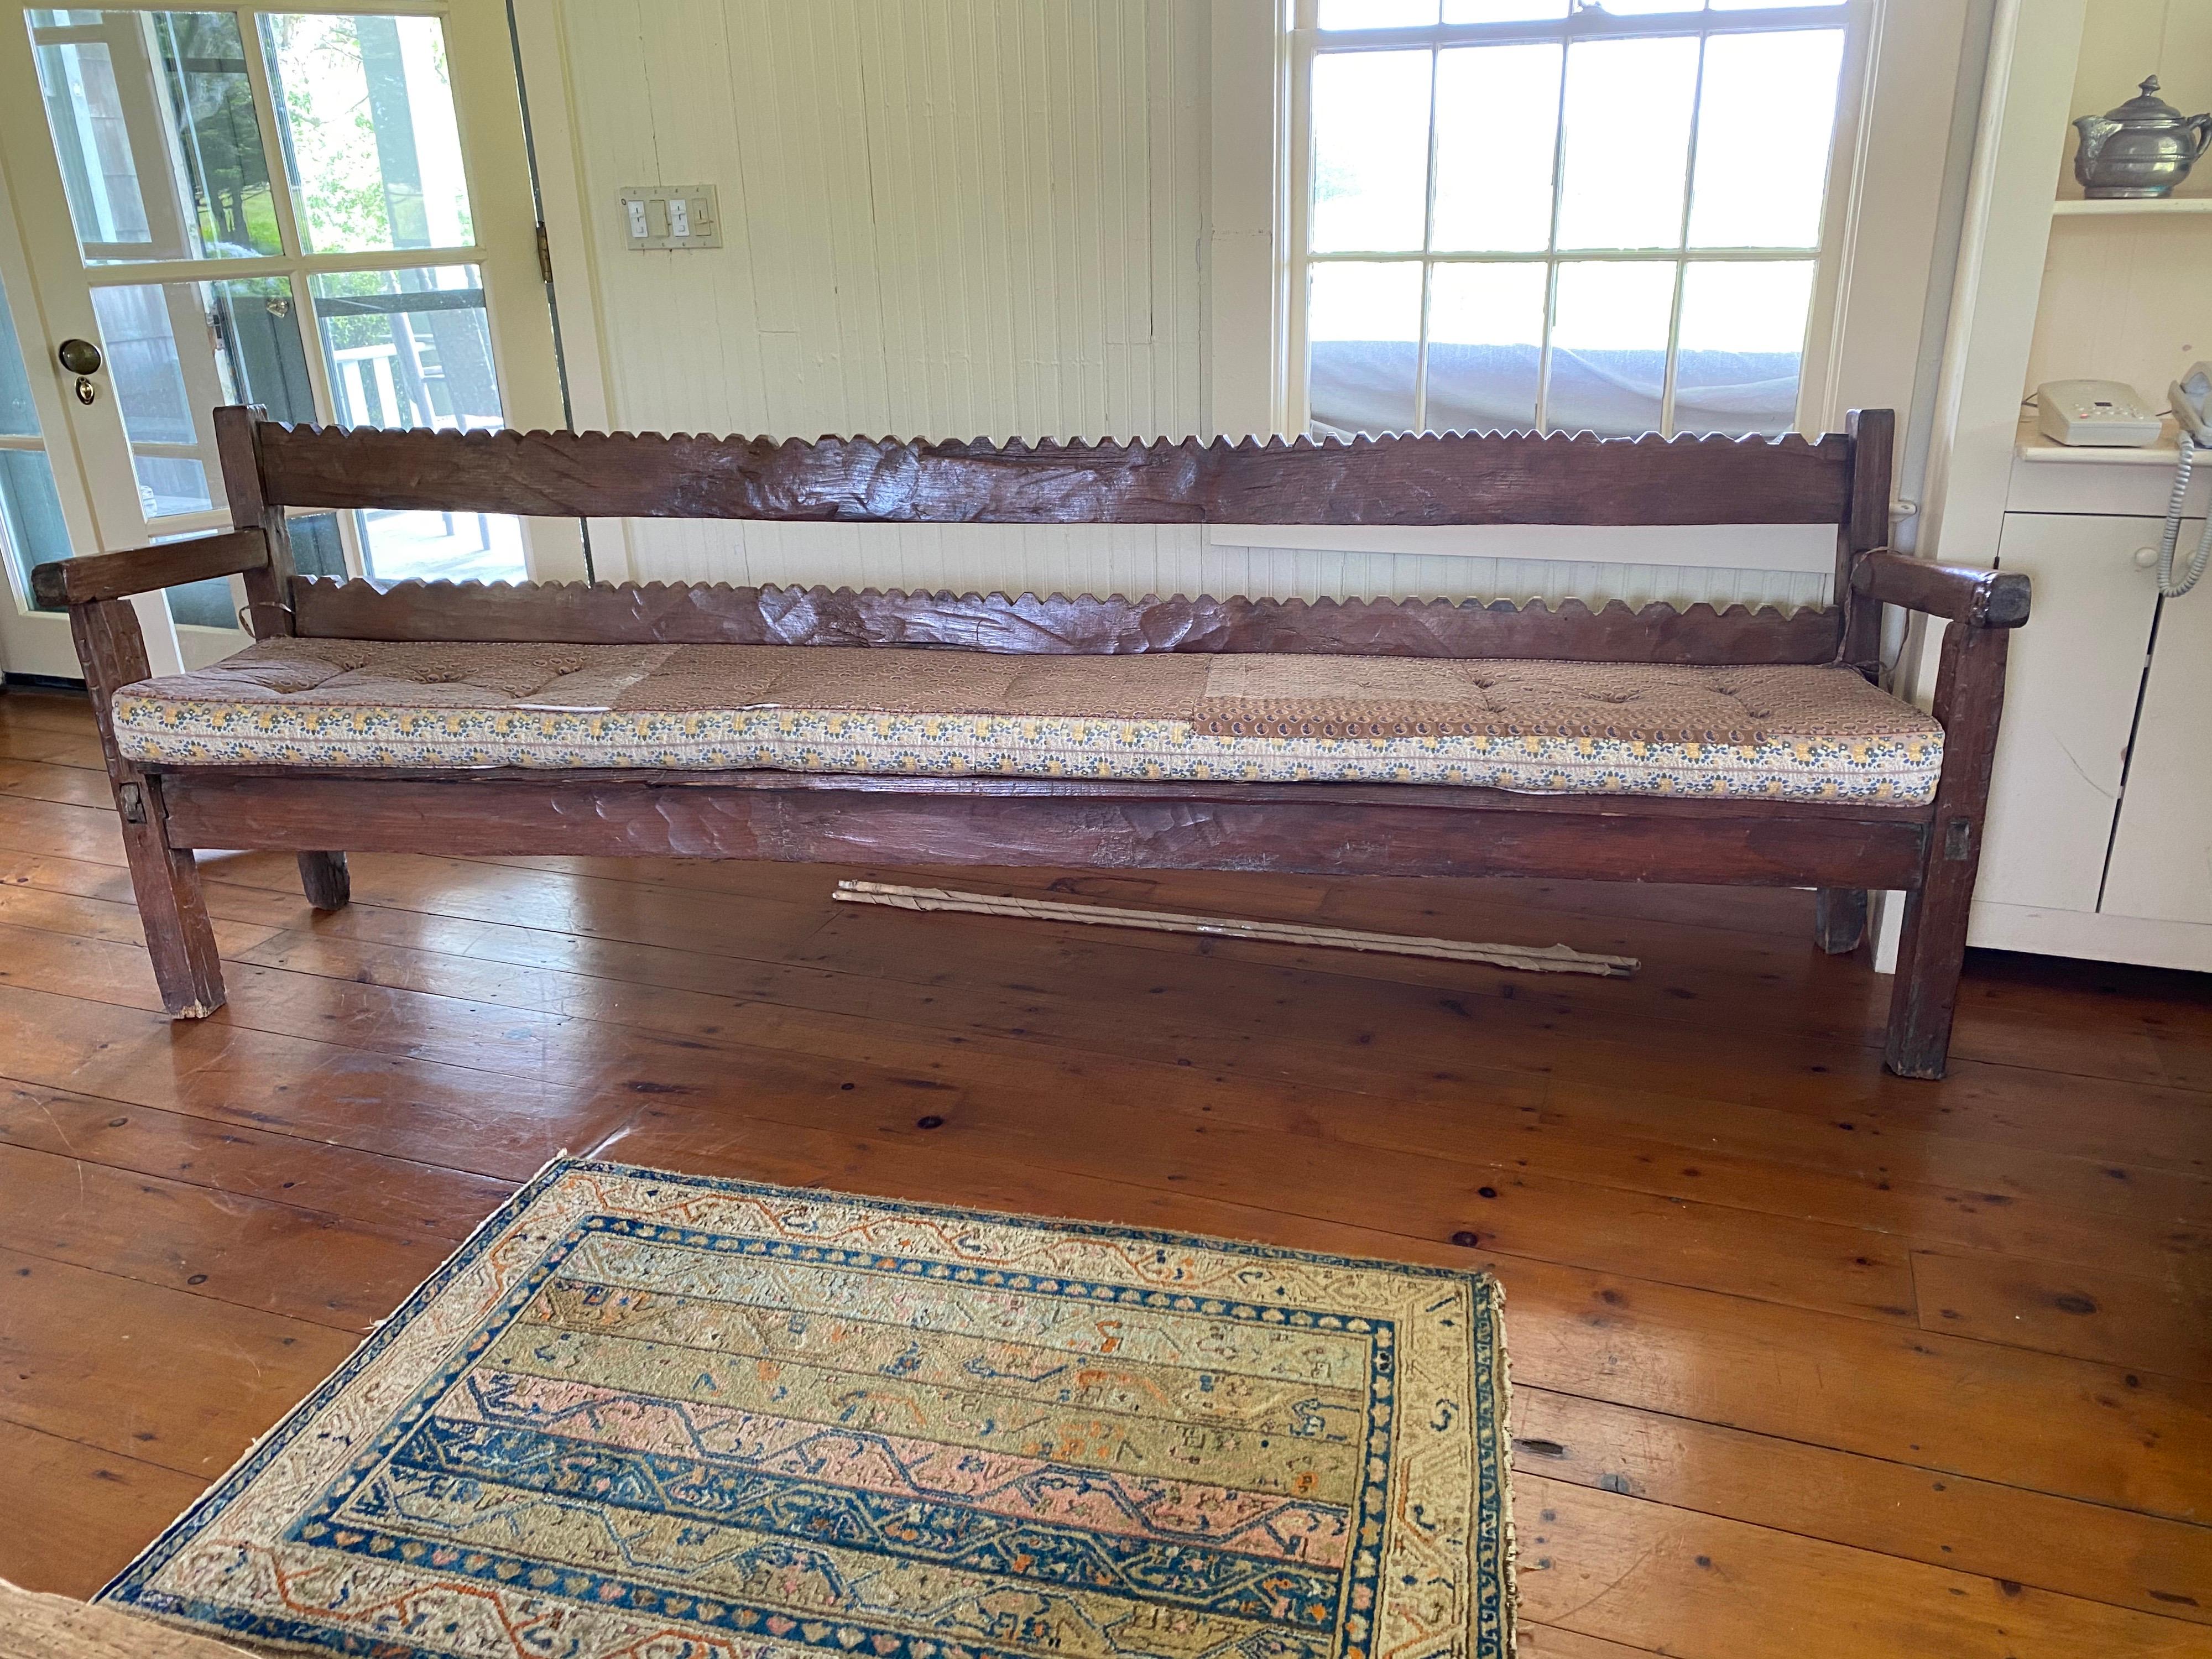 A terrific extra long rustic bench
This bench is hand carved and exceptionally long. Each zig zag has been cut by hand with irregularities adding to the overall charm of the piece. Structurally sound though areas of separation. There is a gap in